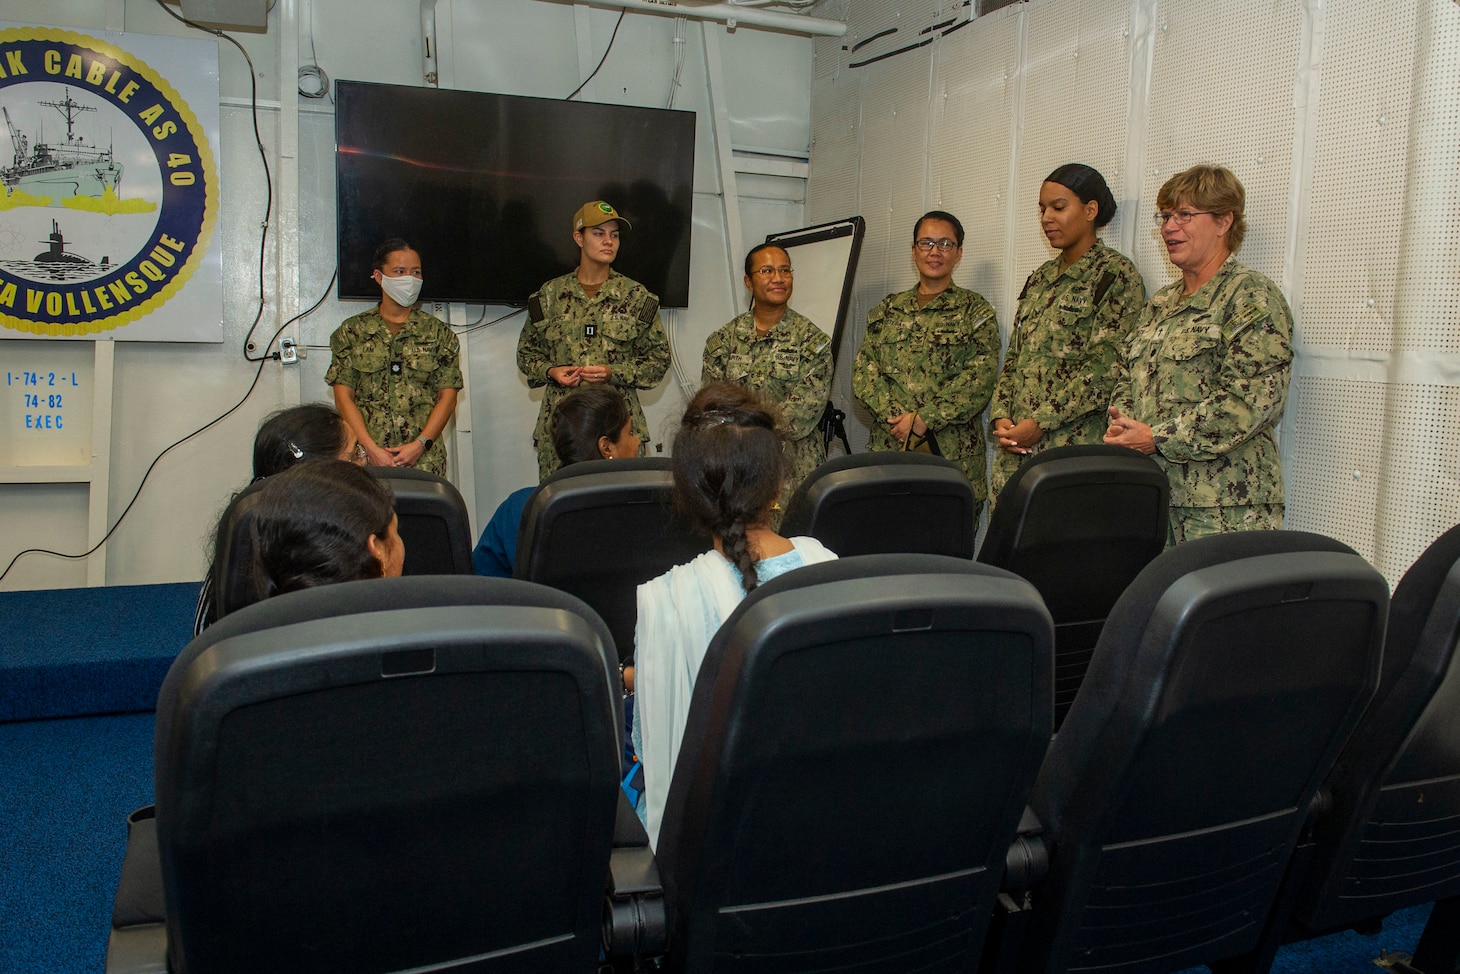 VISAKHAPATNAM, India (Aug. 2, 2022) – Sailors assigned to the Emory S. Land-class submarine tender USS Frank Cable (AS 40) speak with students from St. Joseph’s College for Women during a tour of the ship while moored in Visakhapatnam, India, Aug. 2, 2022. Frank Cable is currently on patrol conducting expeditionary maintenance and logistics in the 7th Fleet area of operations in support of a free and open Indo-Pacific. (U.S. Navy photo by Mass Communication Specialist 2nd Class Kaitlyn E. Eads)